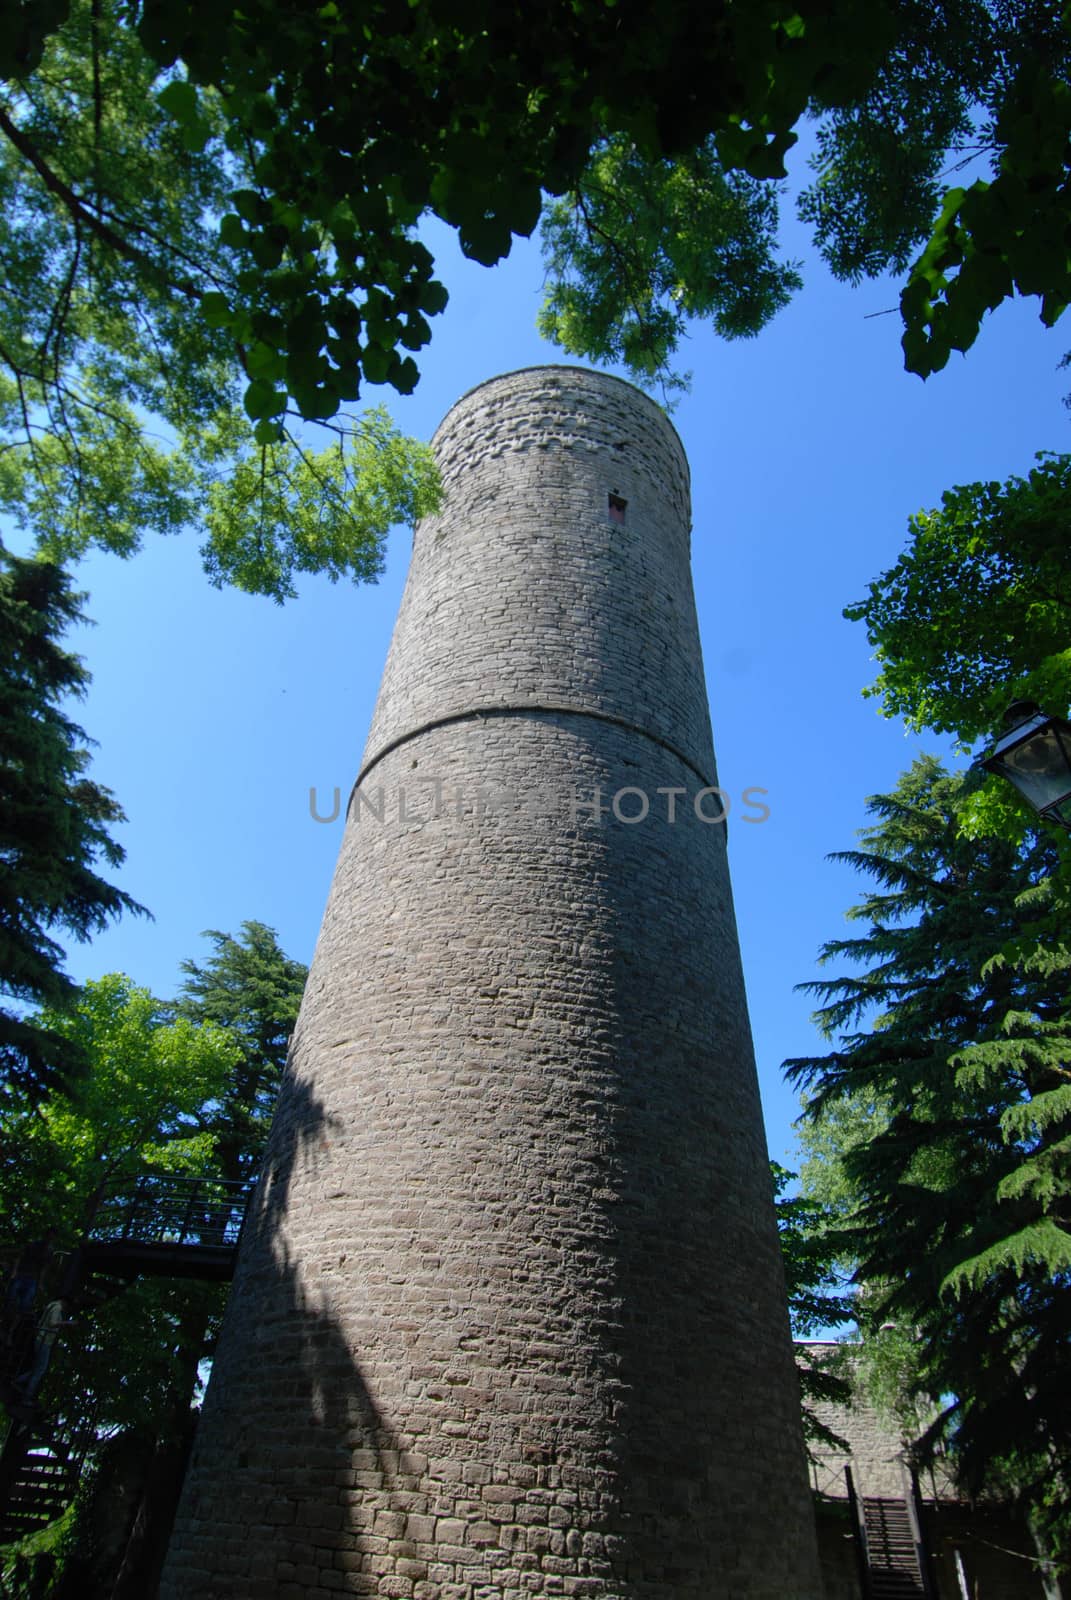 View of the Tower of Roccaverano, Cuneo Piedmont